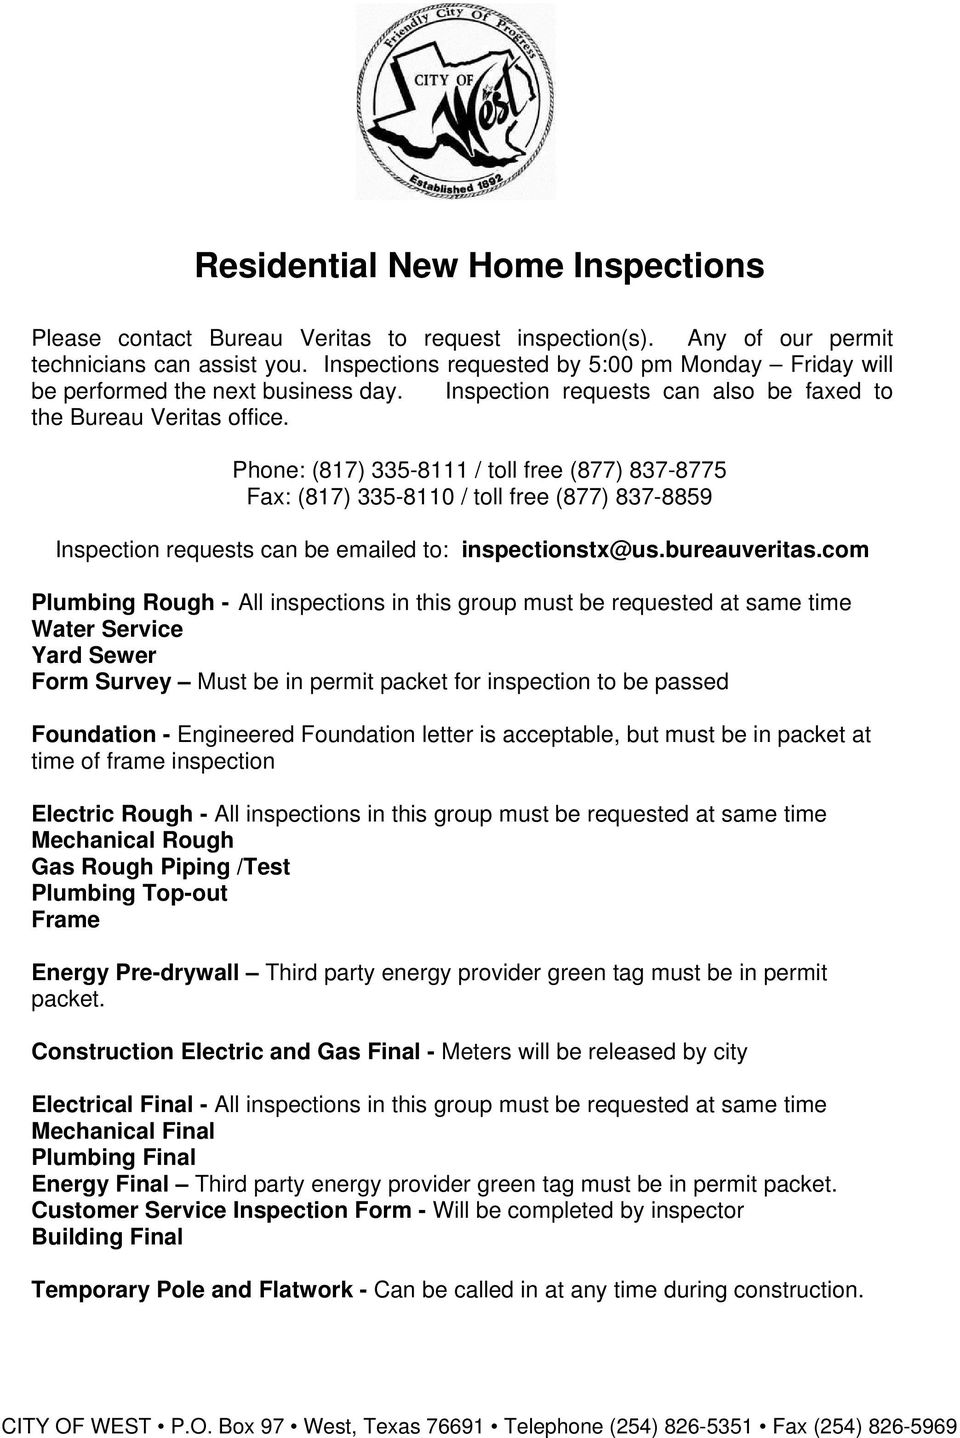 Phone: (817) 335-8111 / toll free (877) 837-8775 Fax: (817) 335-8110 / toll free (877) 837-8859 Inspection requests can be emailed to: inspectionstx@us.bureauveritas.